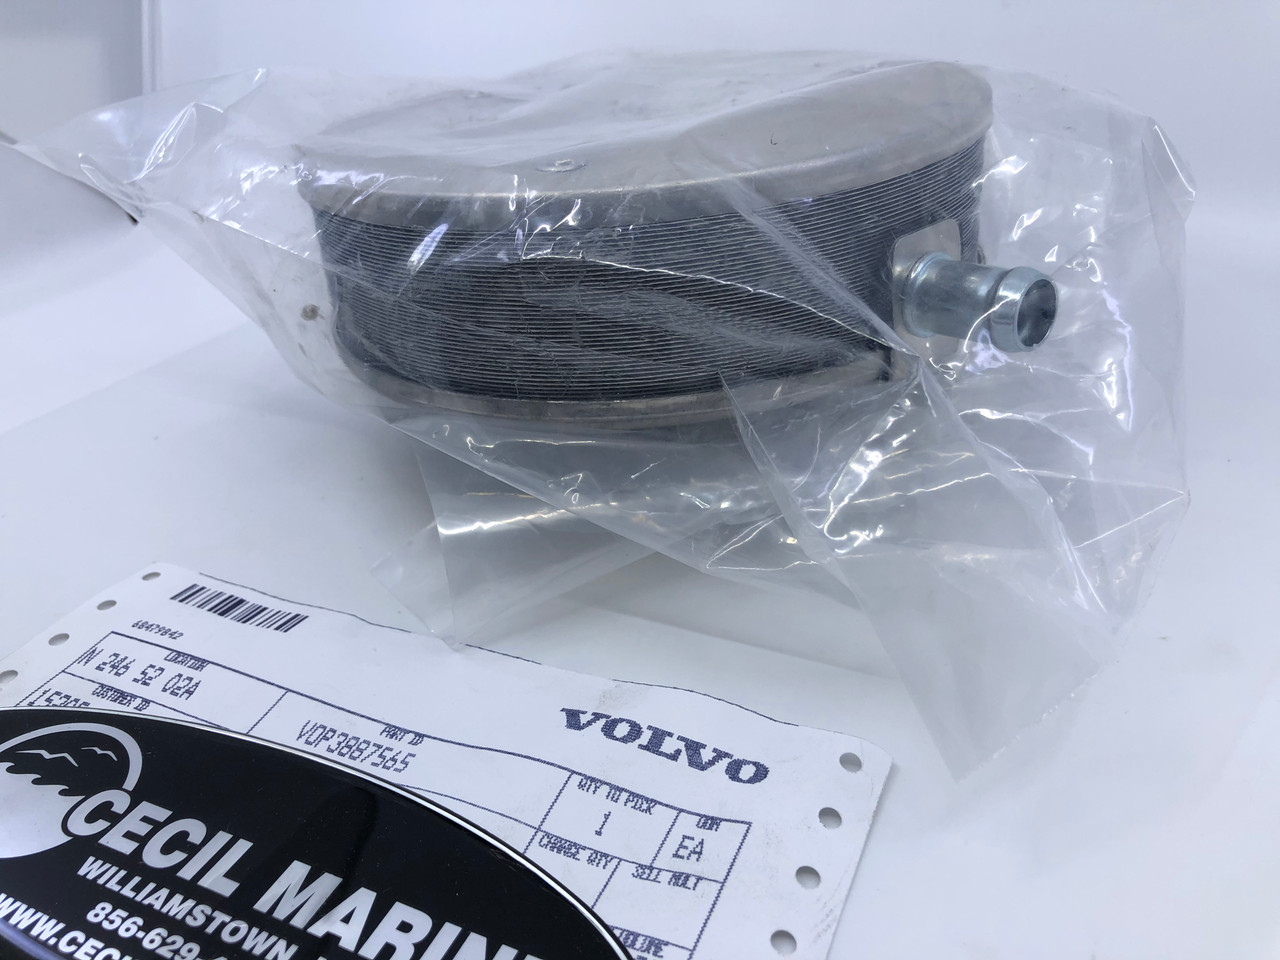 $94.99* GENUINE VOLVO no tax* FLAME SHIELD 3887565 *In Stock & Ready To Ship!